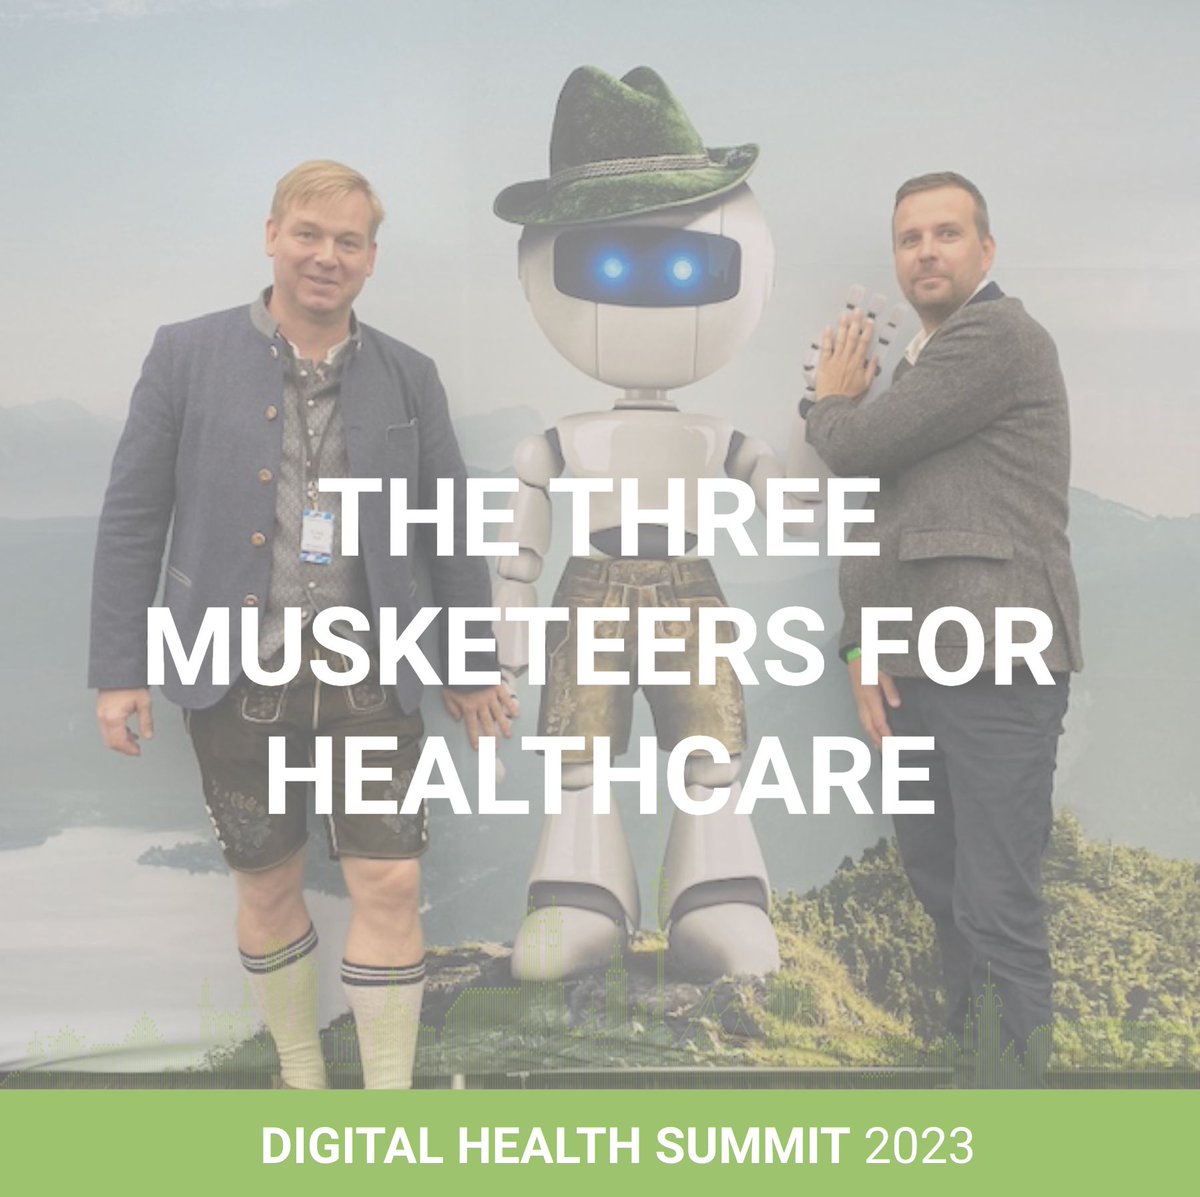 Meet the Three Musketeers of Healthcare at the Digital Health Summit 2023 in Munich! Register now and get your Tickets: buff.ly/2GUr57o

#dhsmuc #DHS23